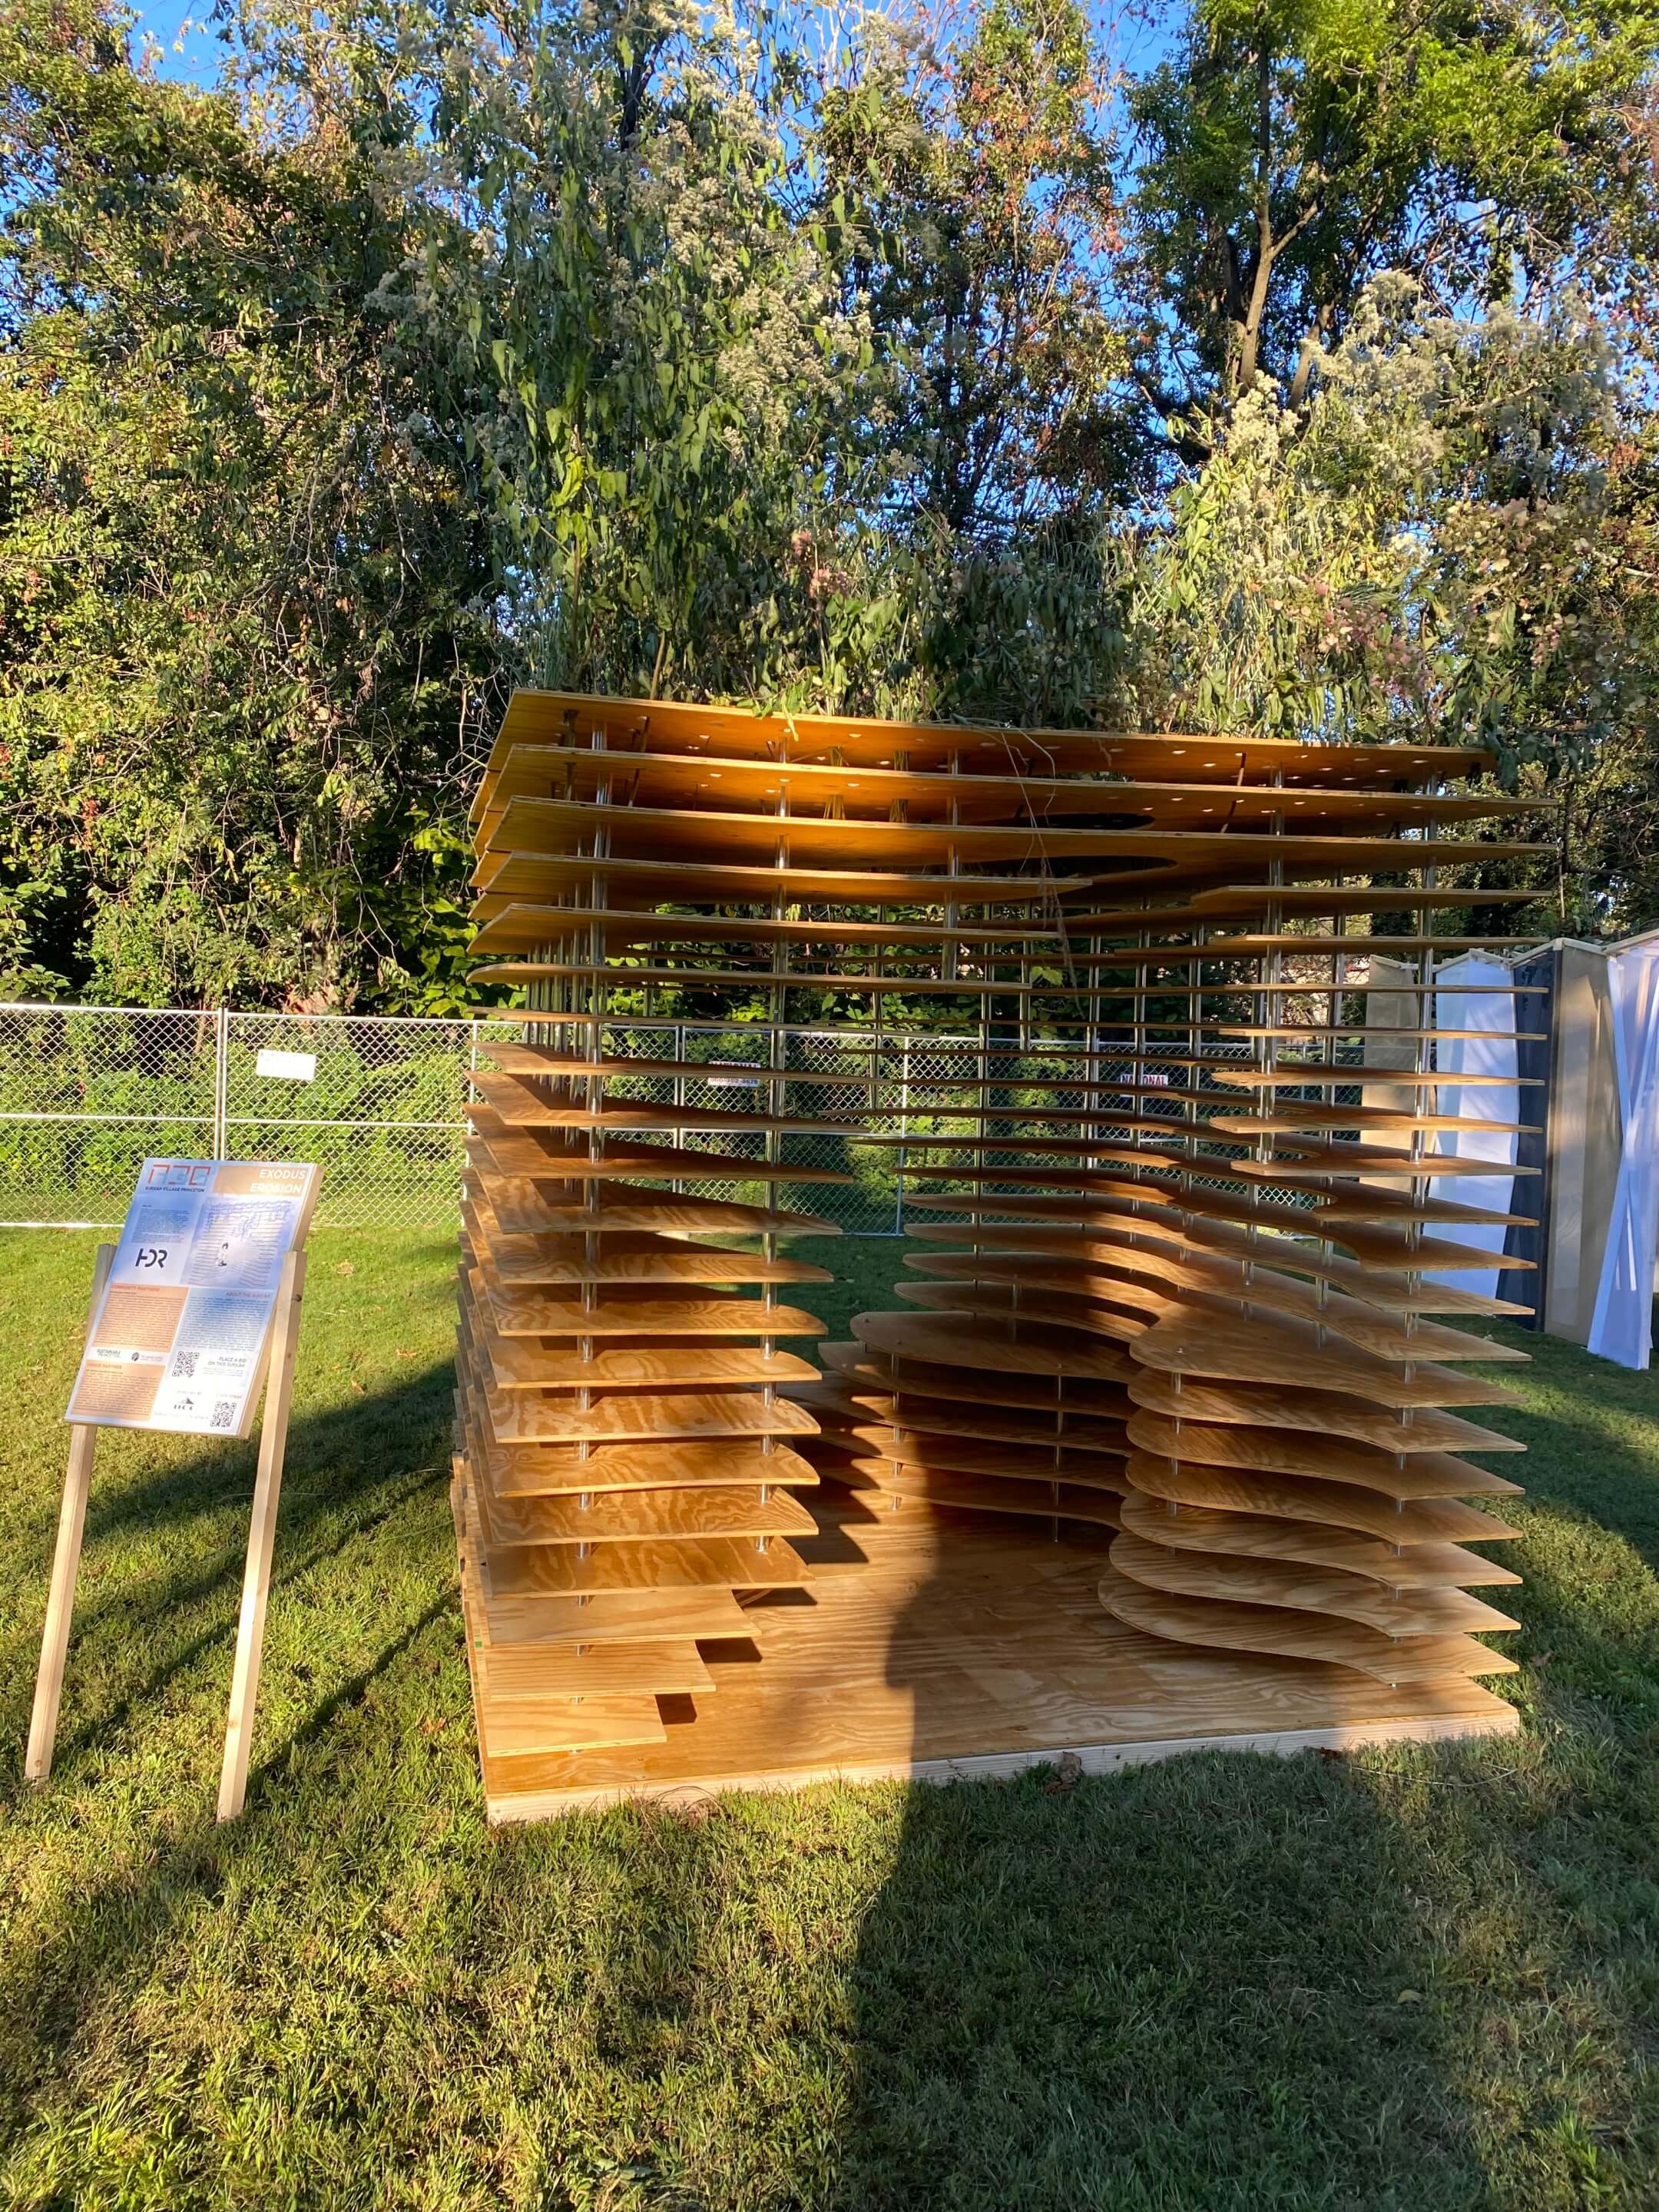 a wooden sukkah on display